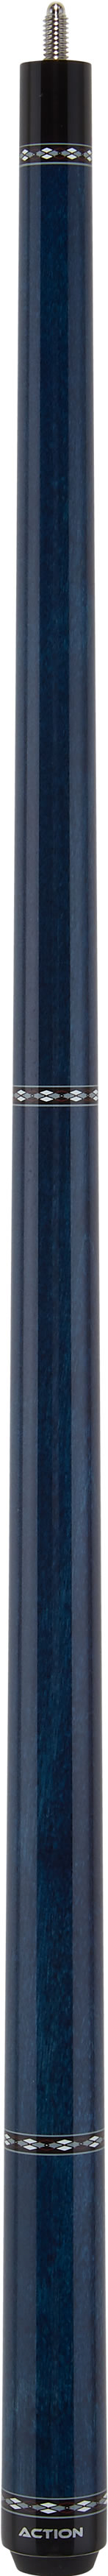 Action VAL33 Value Pool Cue Pool Cue